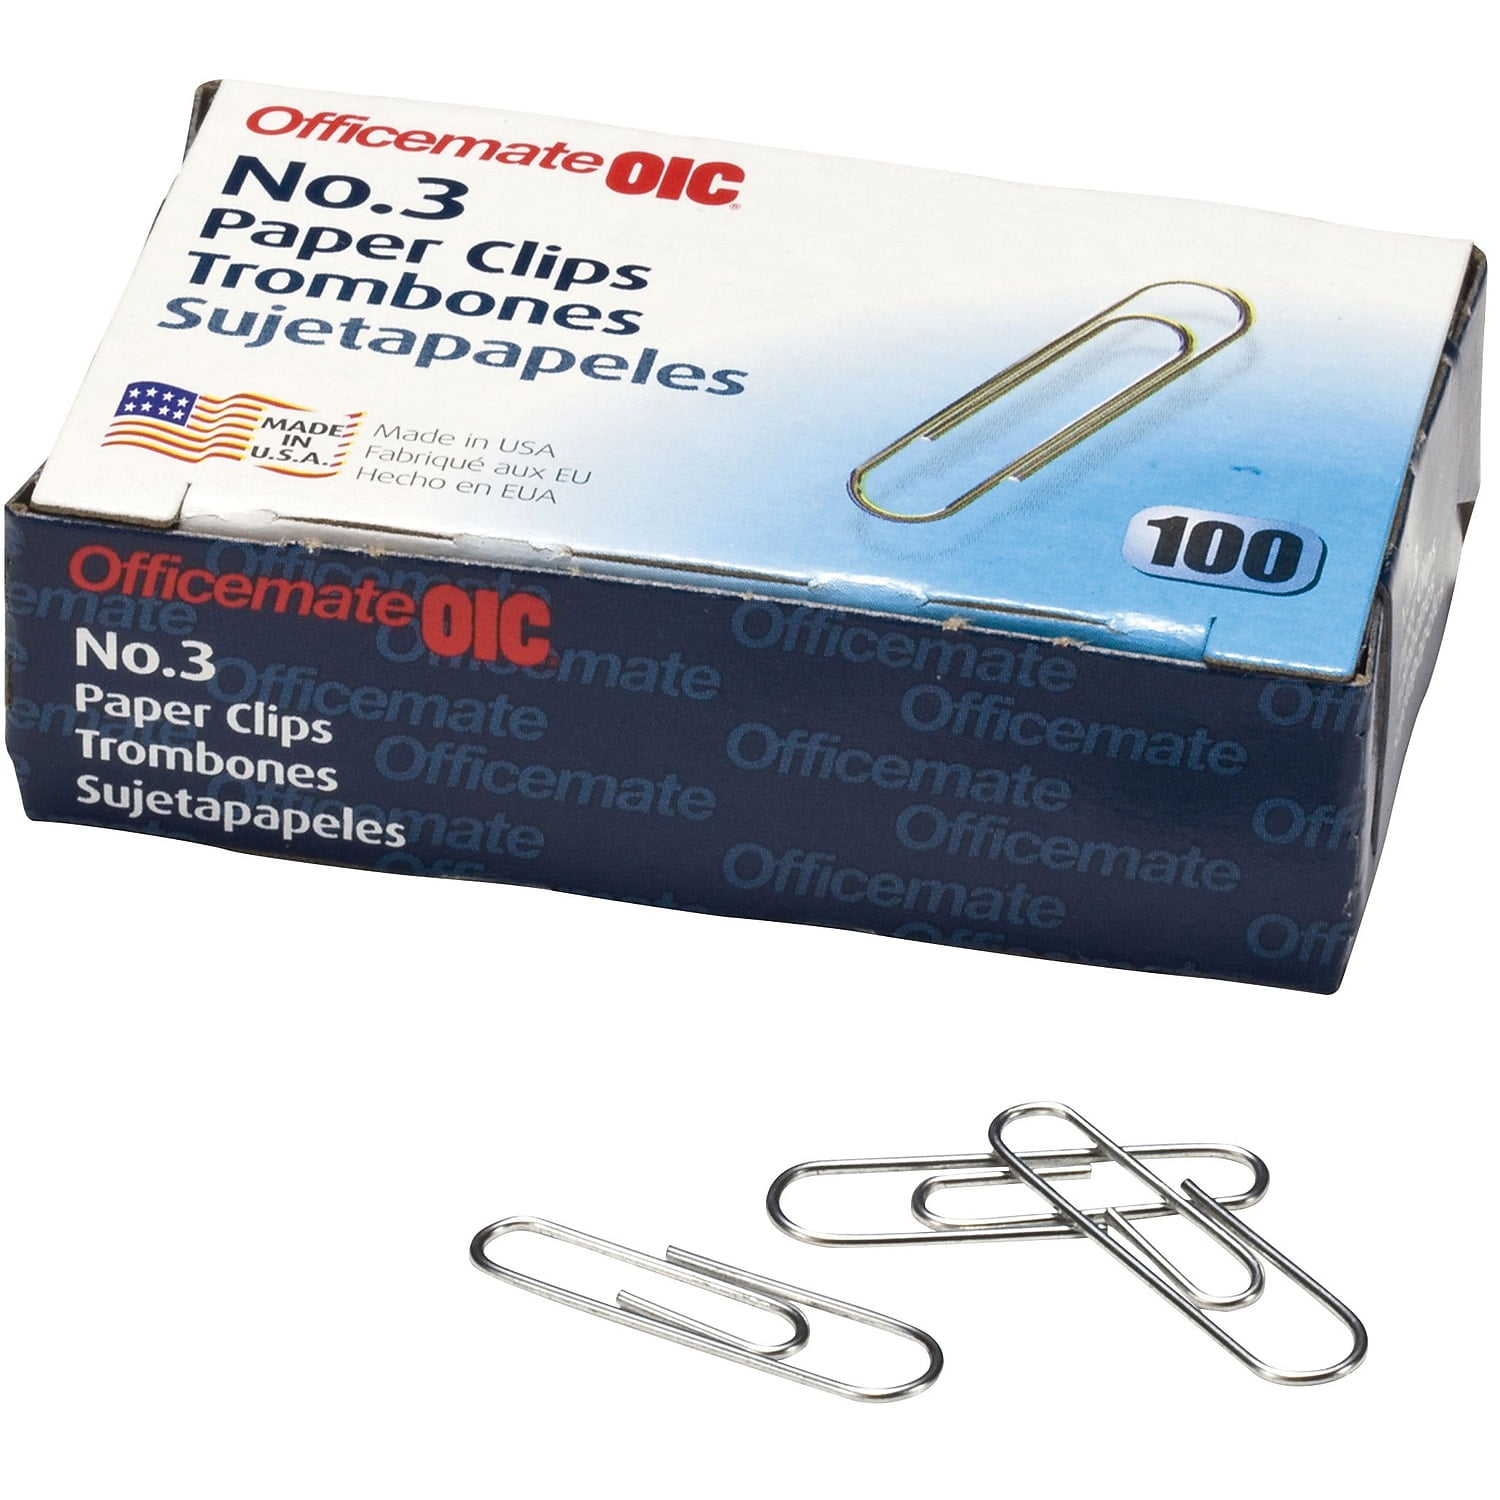 OIC93690 - Officemate Magnetic Top Paper Clip Dispenser, OIC 93690